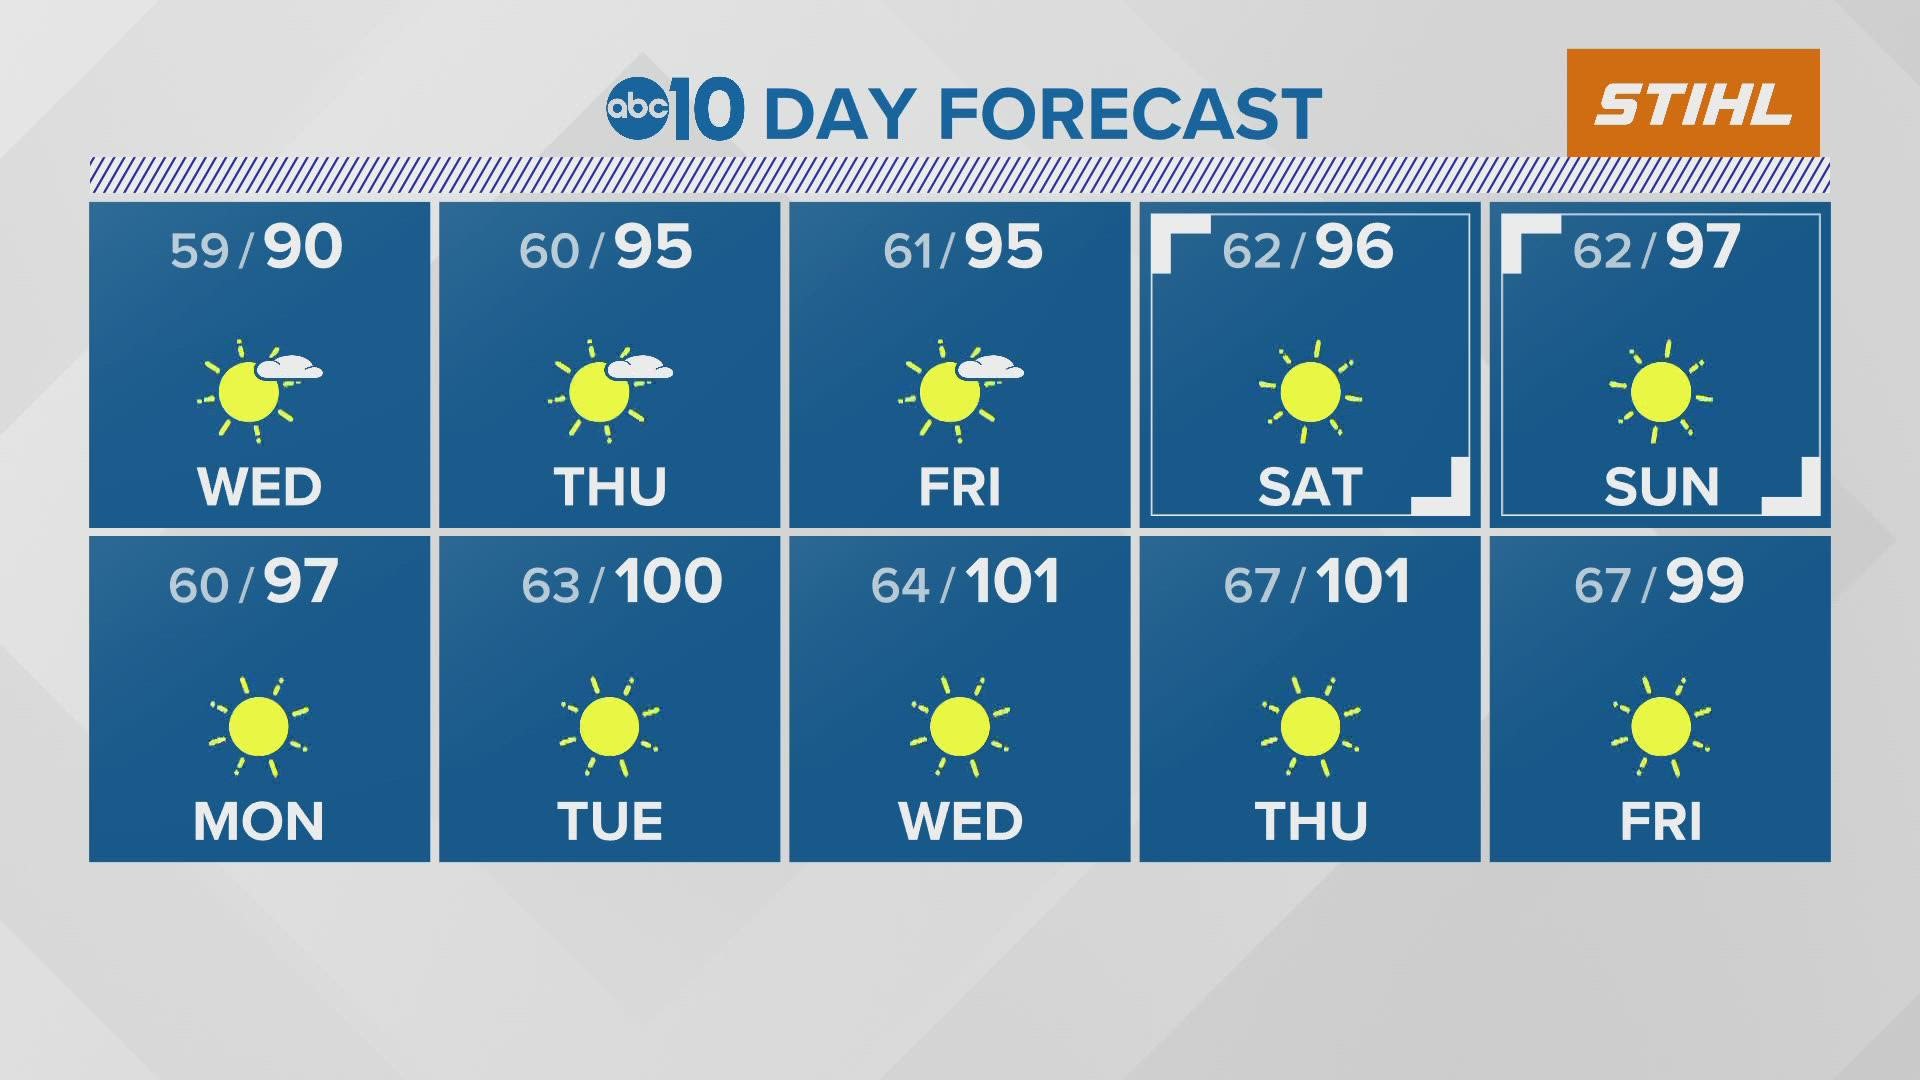 ABC10 meteorologist Carley Gomez tells us what to expect for the next 10 days of weather.